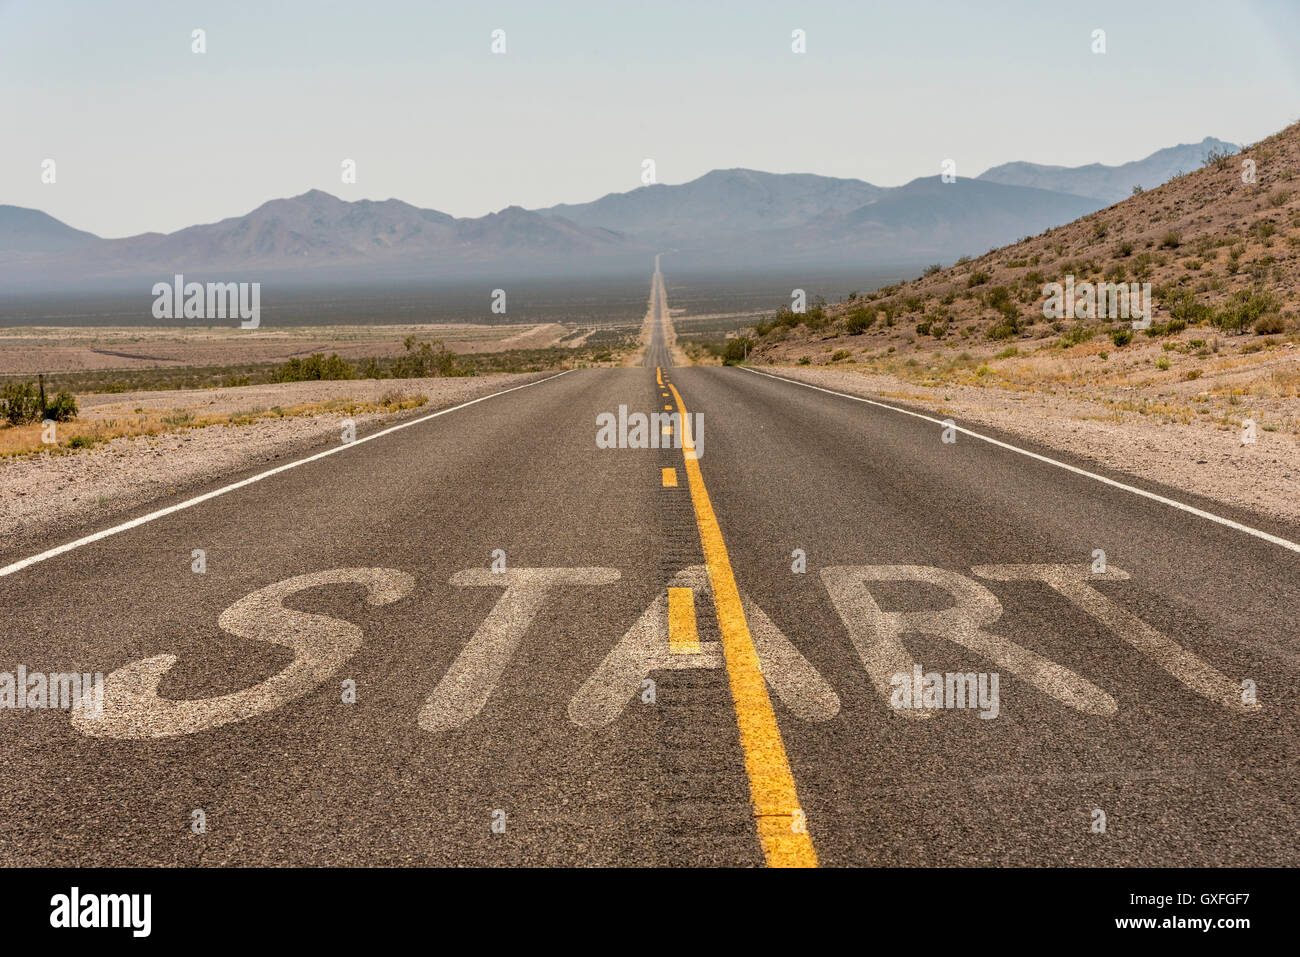 Landscape of Long road in death valley national park for business goal concept Stock Photo